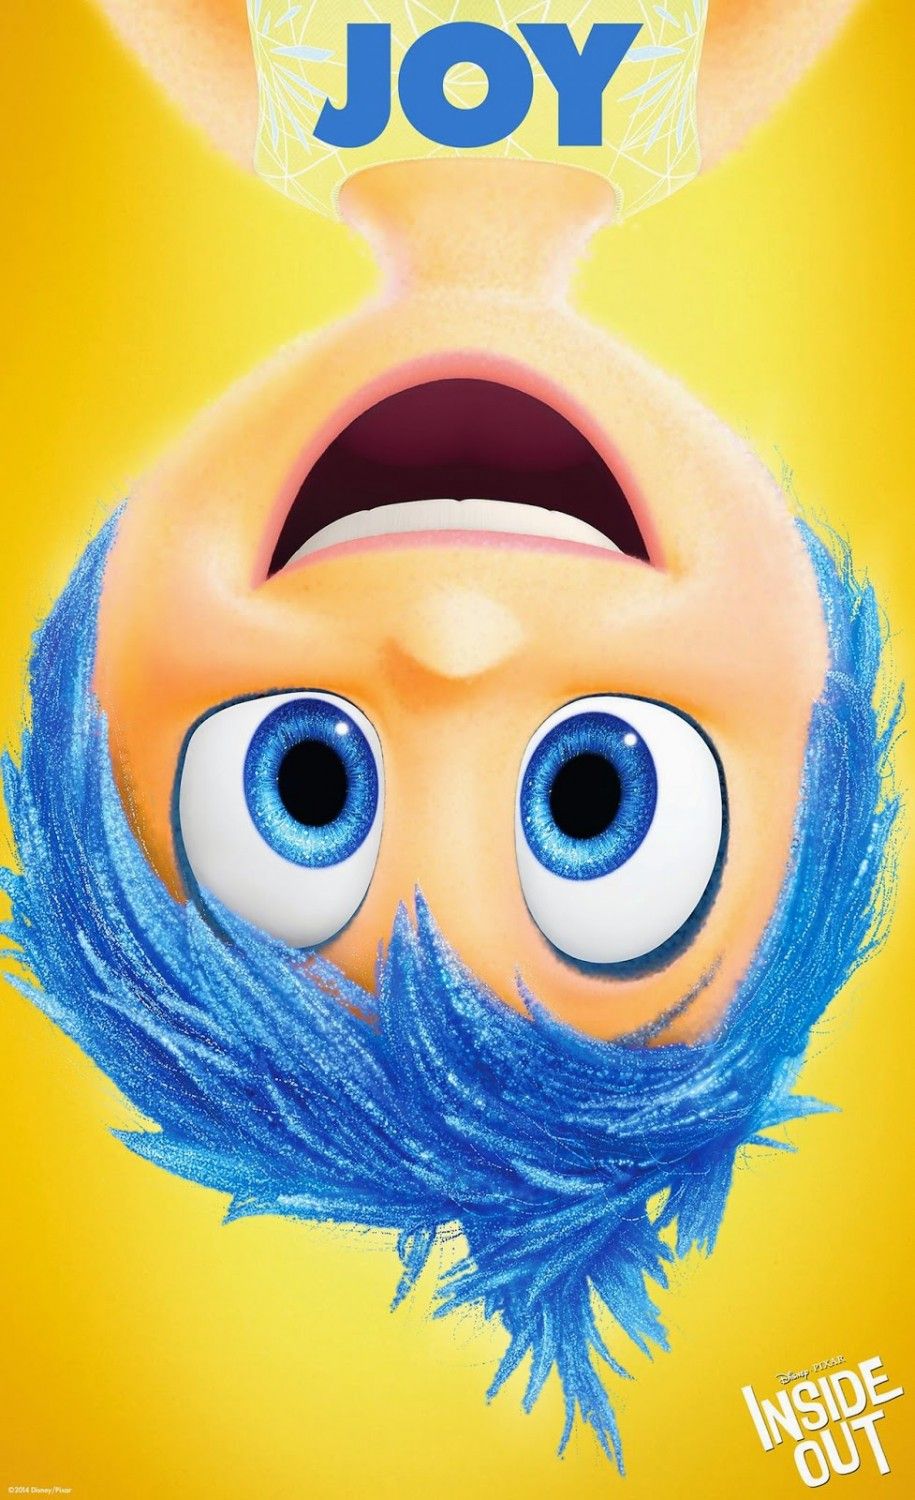 New Inside Out Character Posters Devote Mental Energy ...
